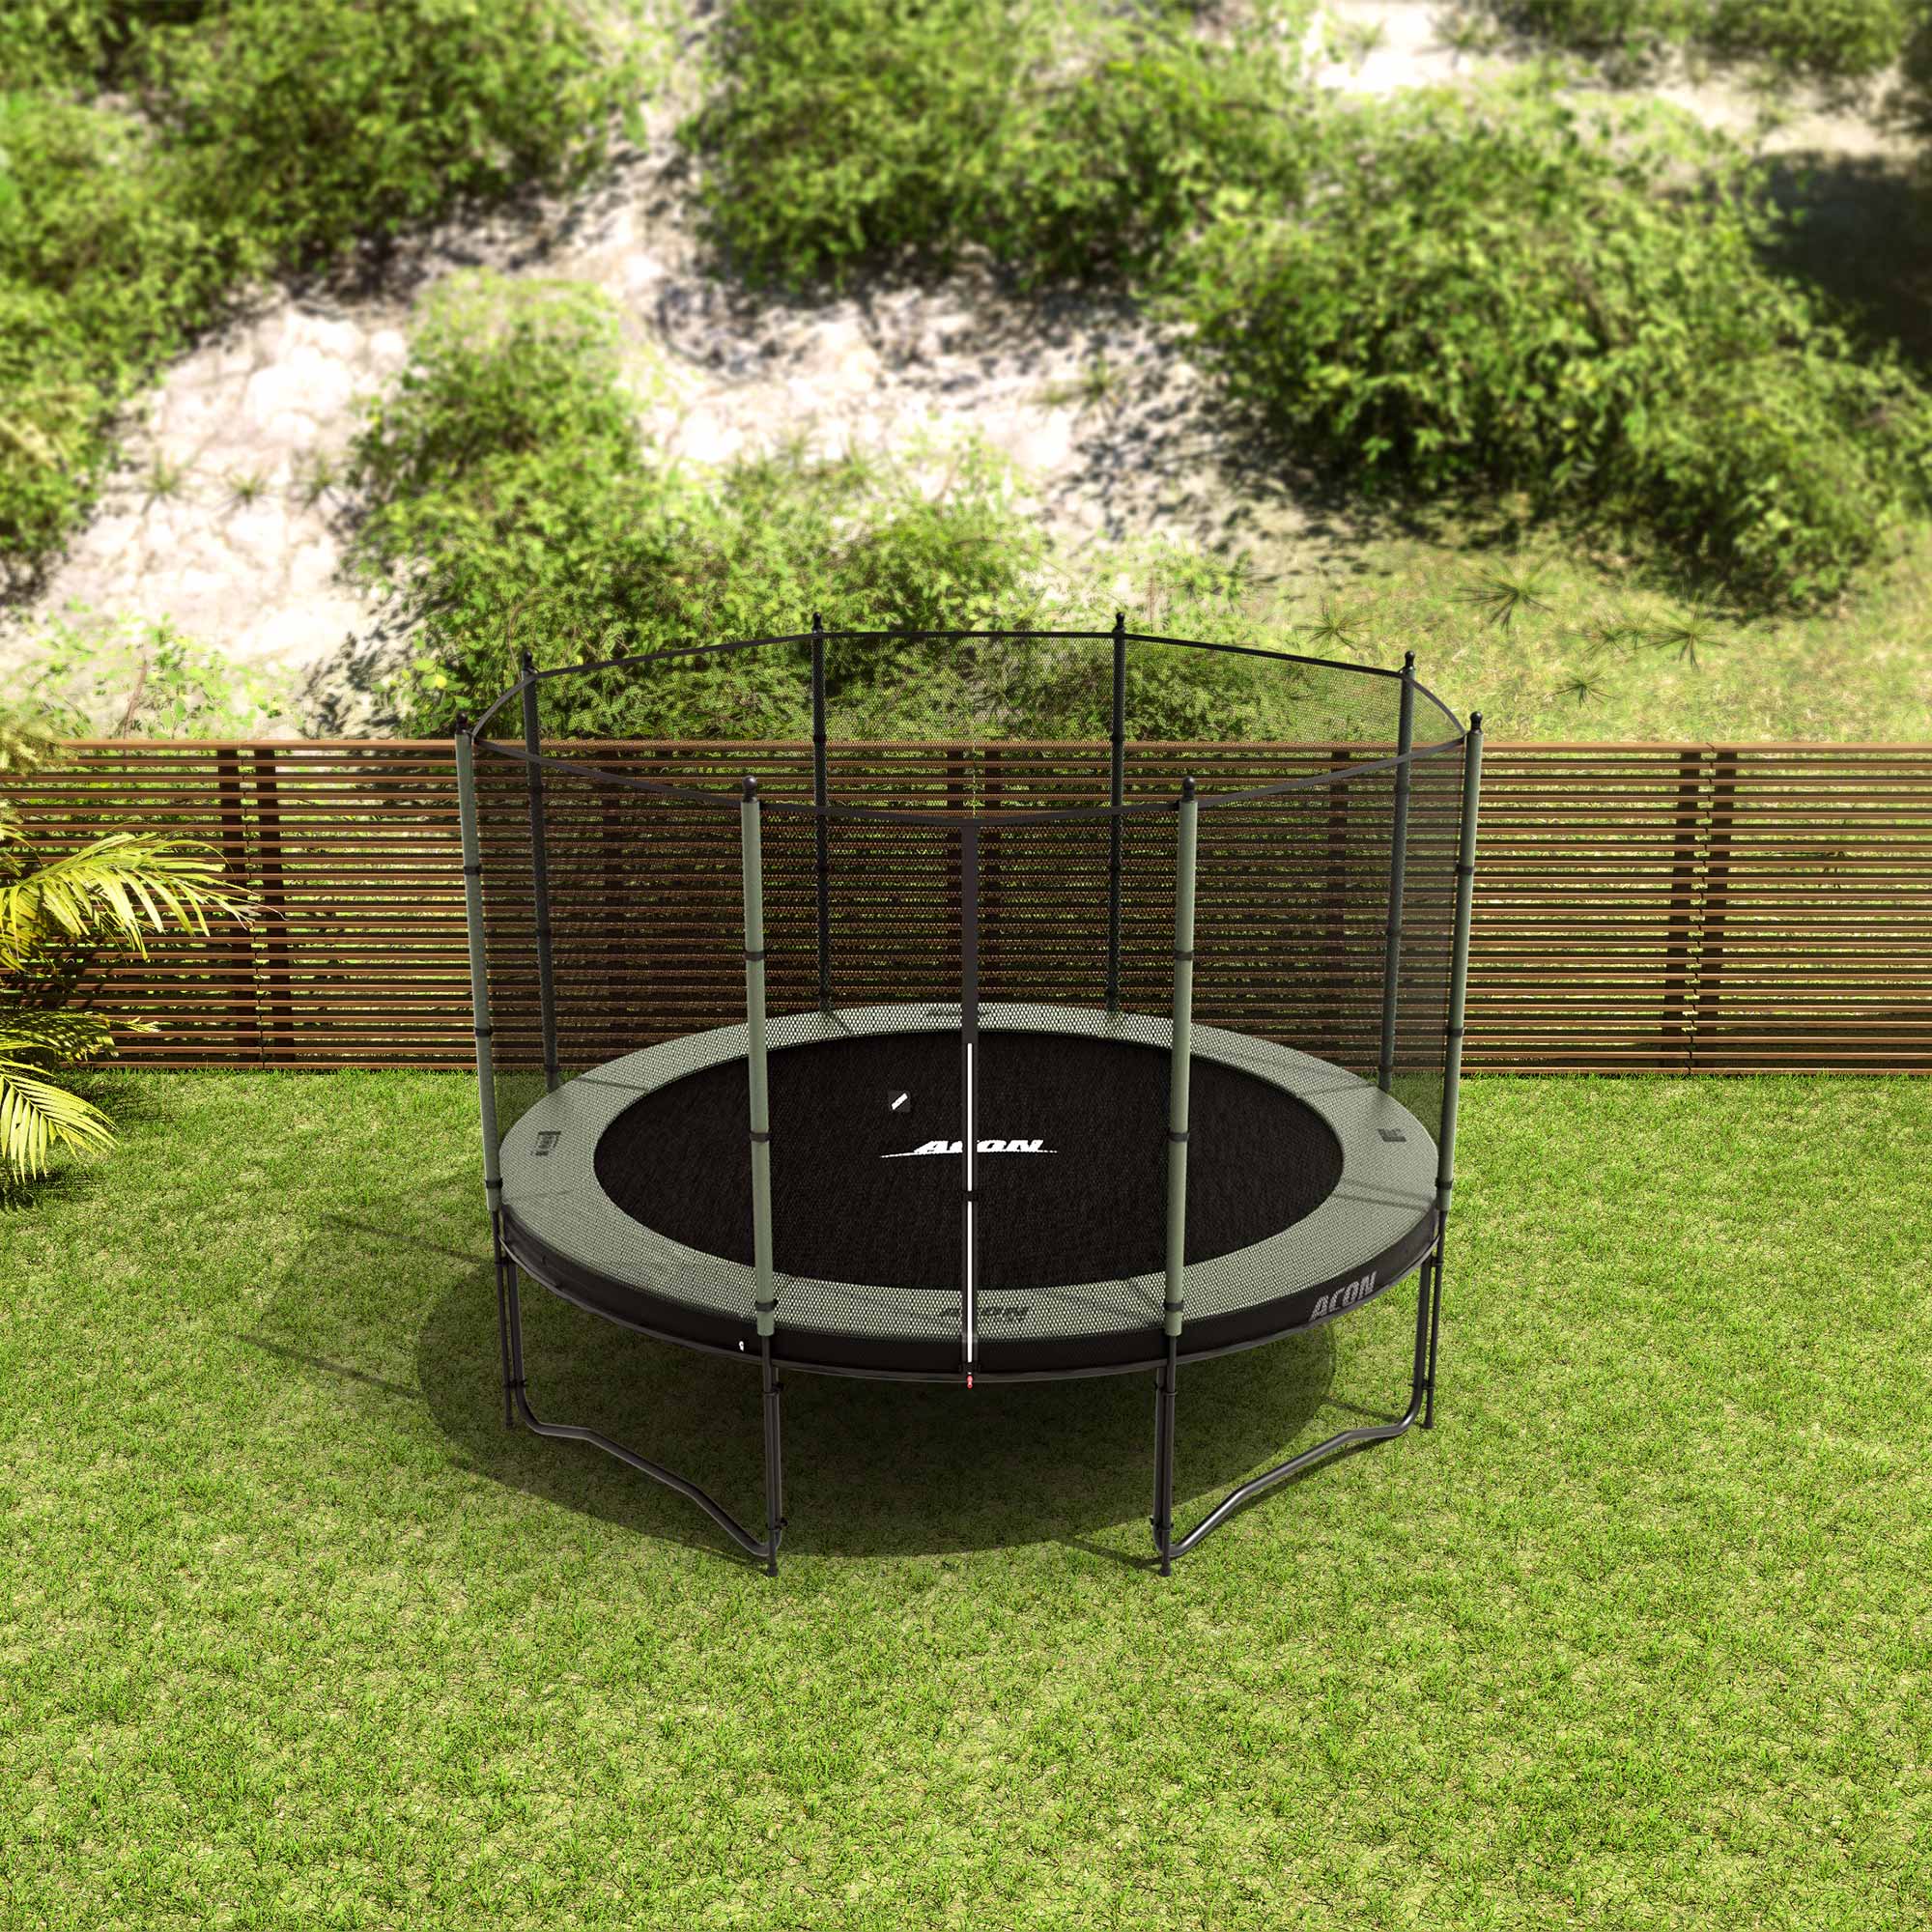 ACON Air 12ft Trampoline with Standard Enclosure in the backyard.